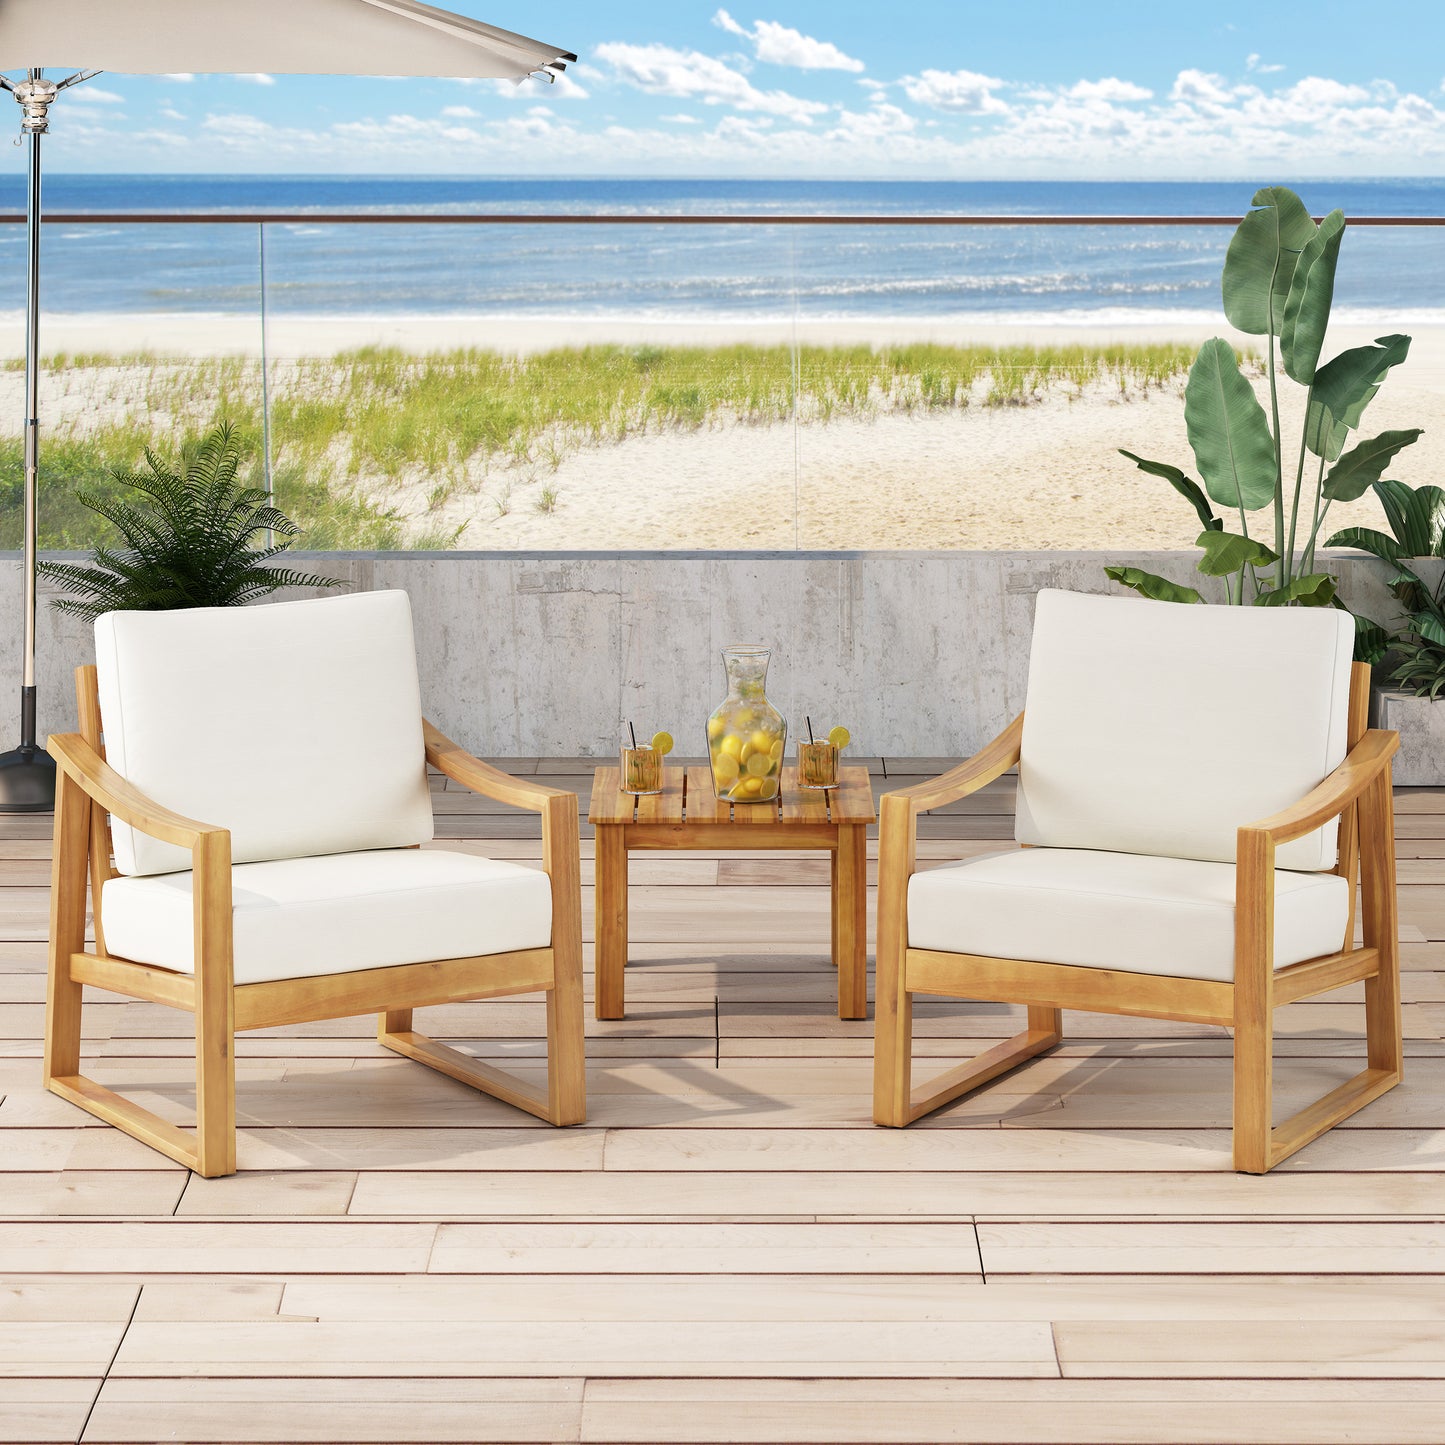 Johnlucas Outdoor Acacia Wood Club Chairs with Water Resistant Cushions (Set of 2)